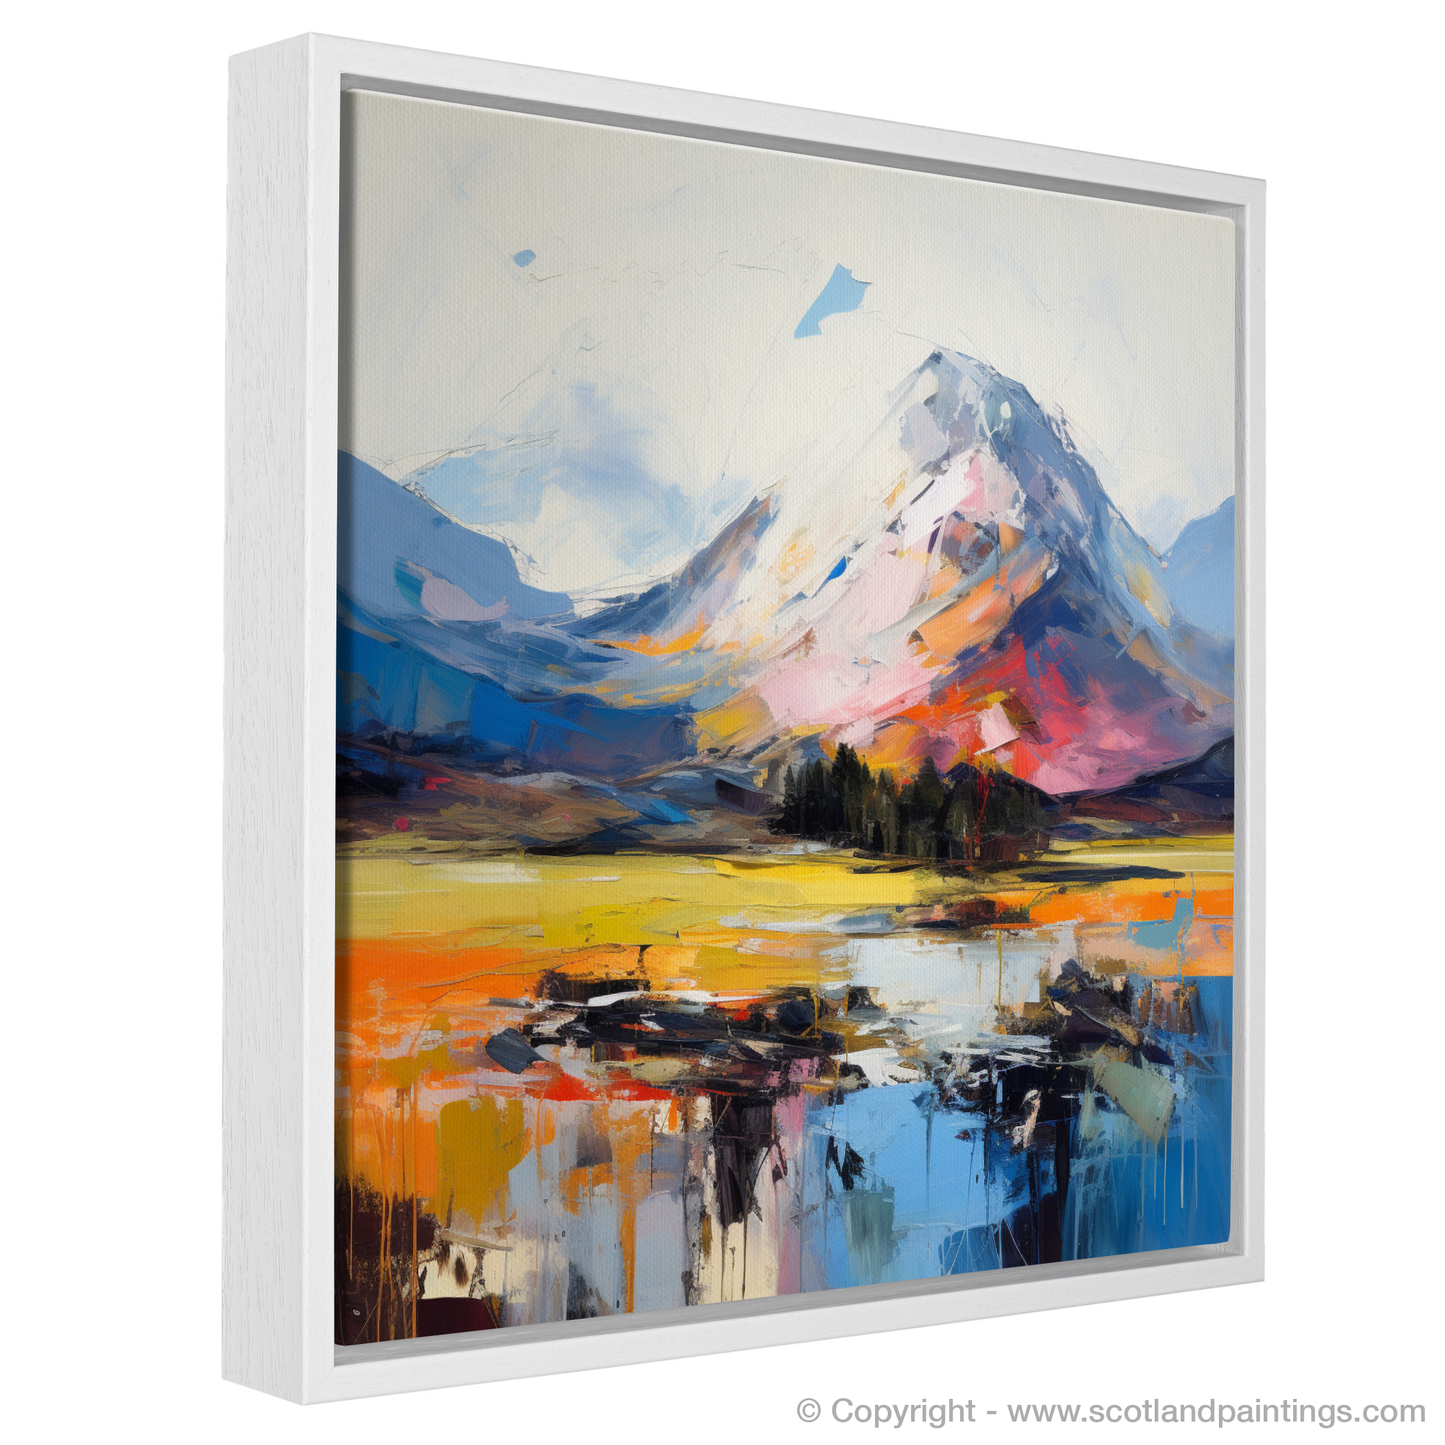 Painting and Art Print of Ben Nevis, Highlands entitled "Ben Nevis Unleashed: An Expressionist Ode to the Scottish Highlands".